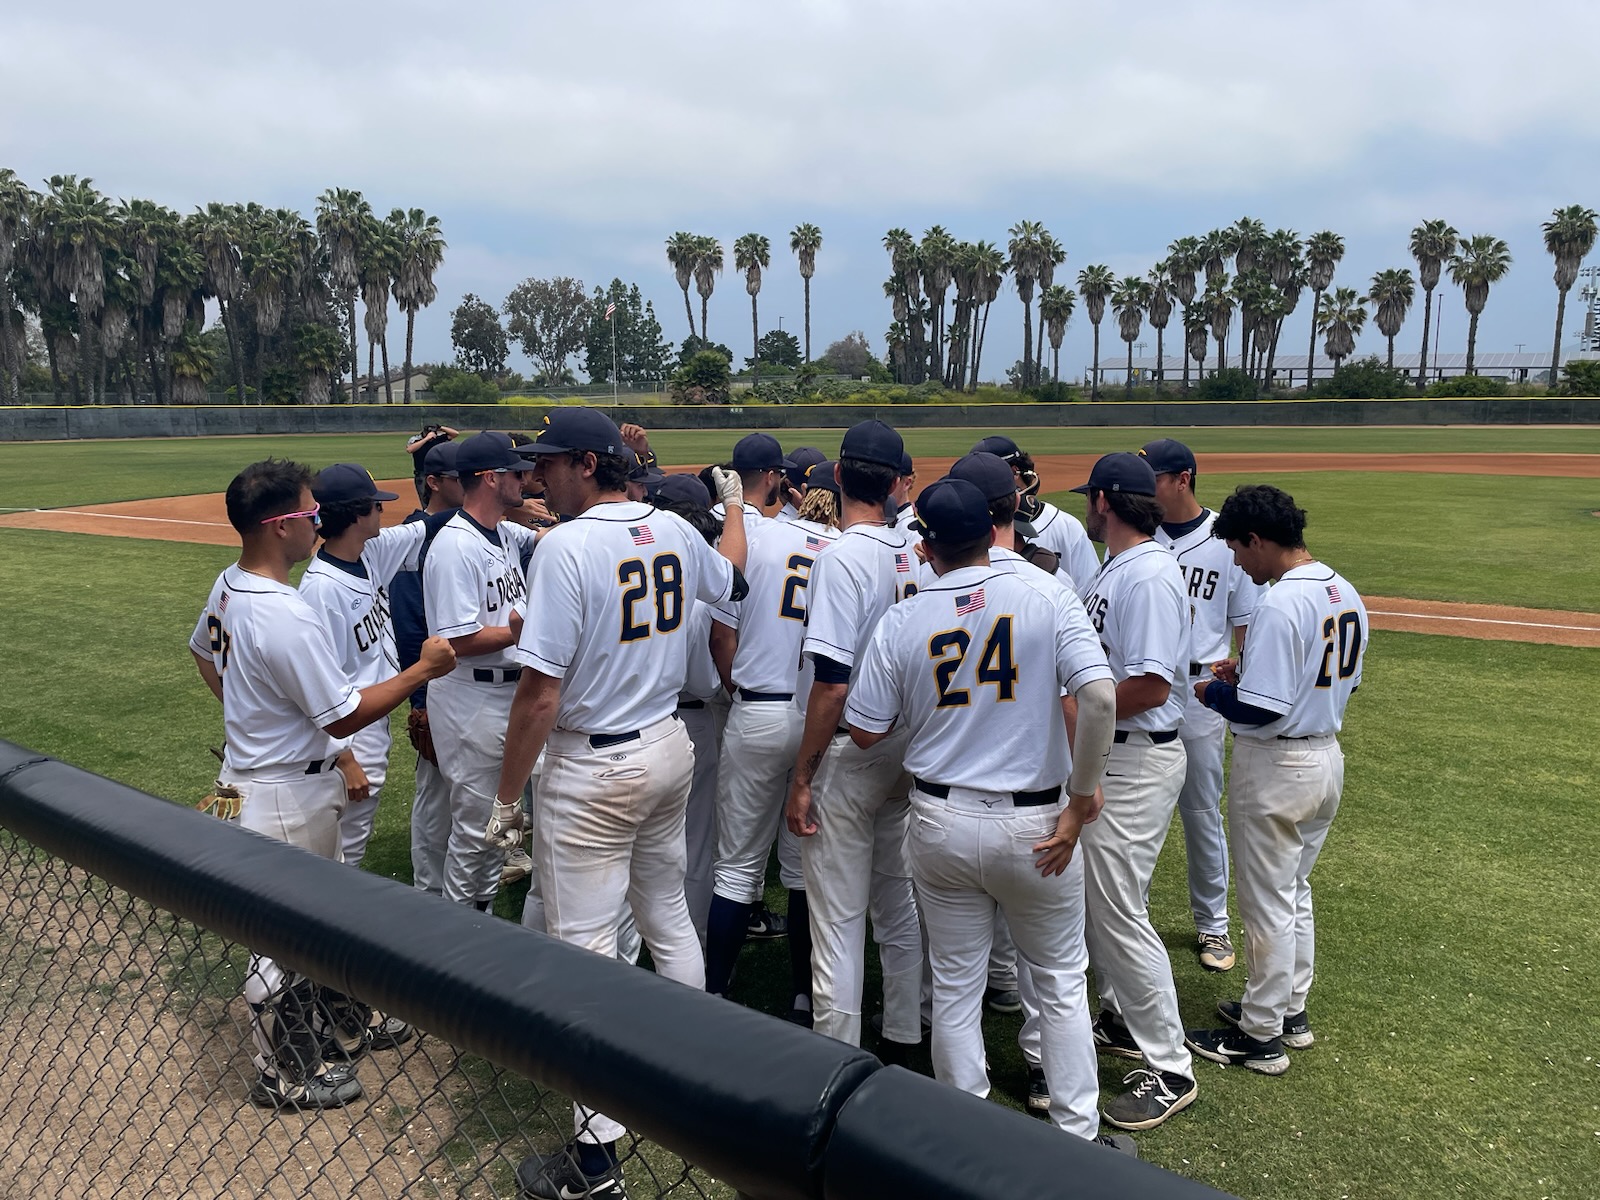 College of the Canyons baseball group phot of team huddled up prior to CCCAA SoCal Super Regional Game vs. Grossmont on May 13, 2023.